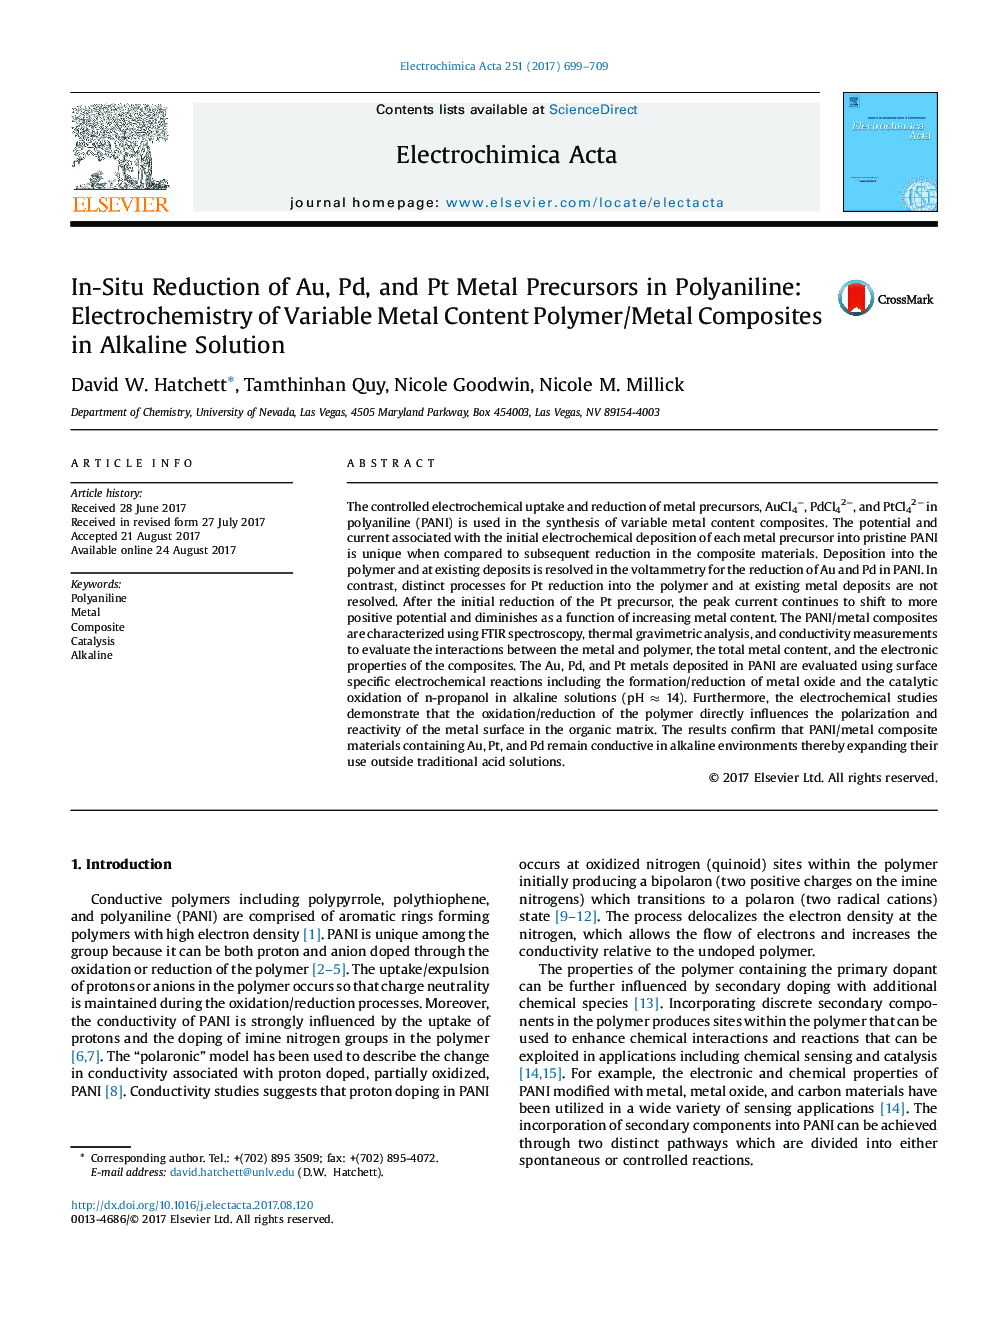 In-Situ Reduction of Au, Pd, and Pt Metal Precursors in Polyaniline: Electrochemistry of Variable Metal Content Polymer/Metal Composites in Alkaline Solution